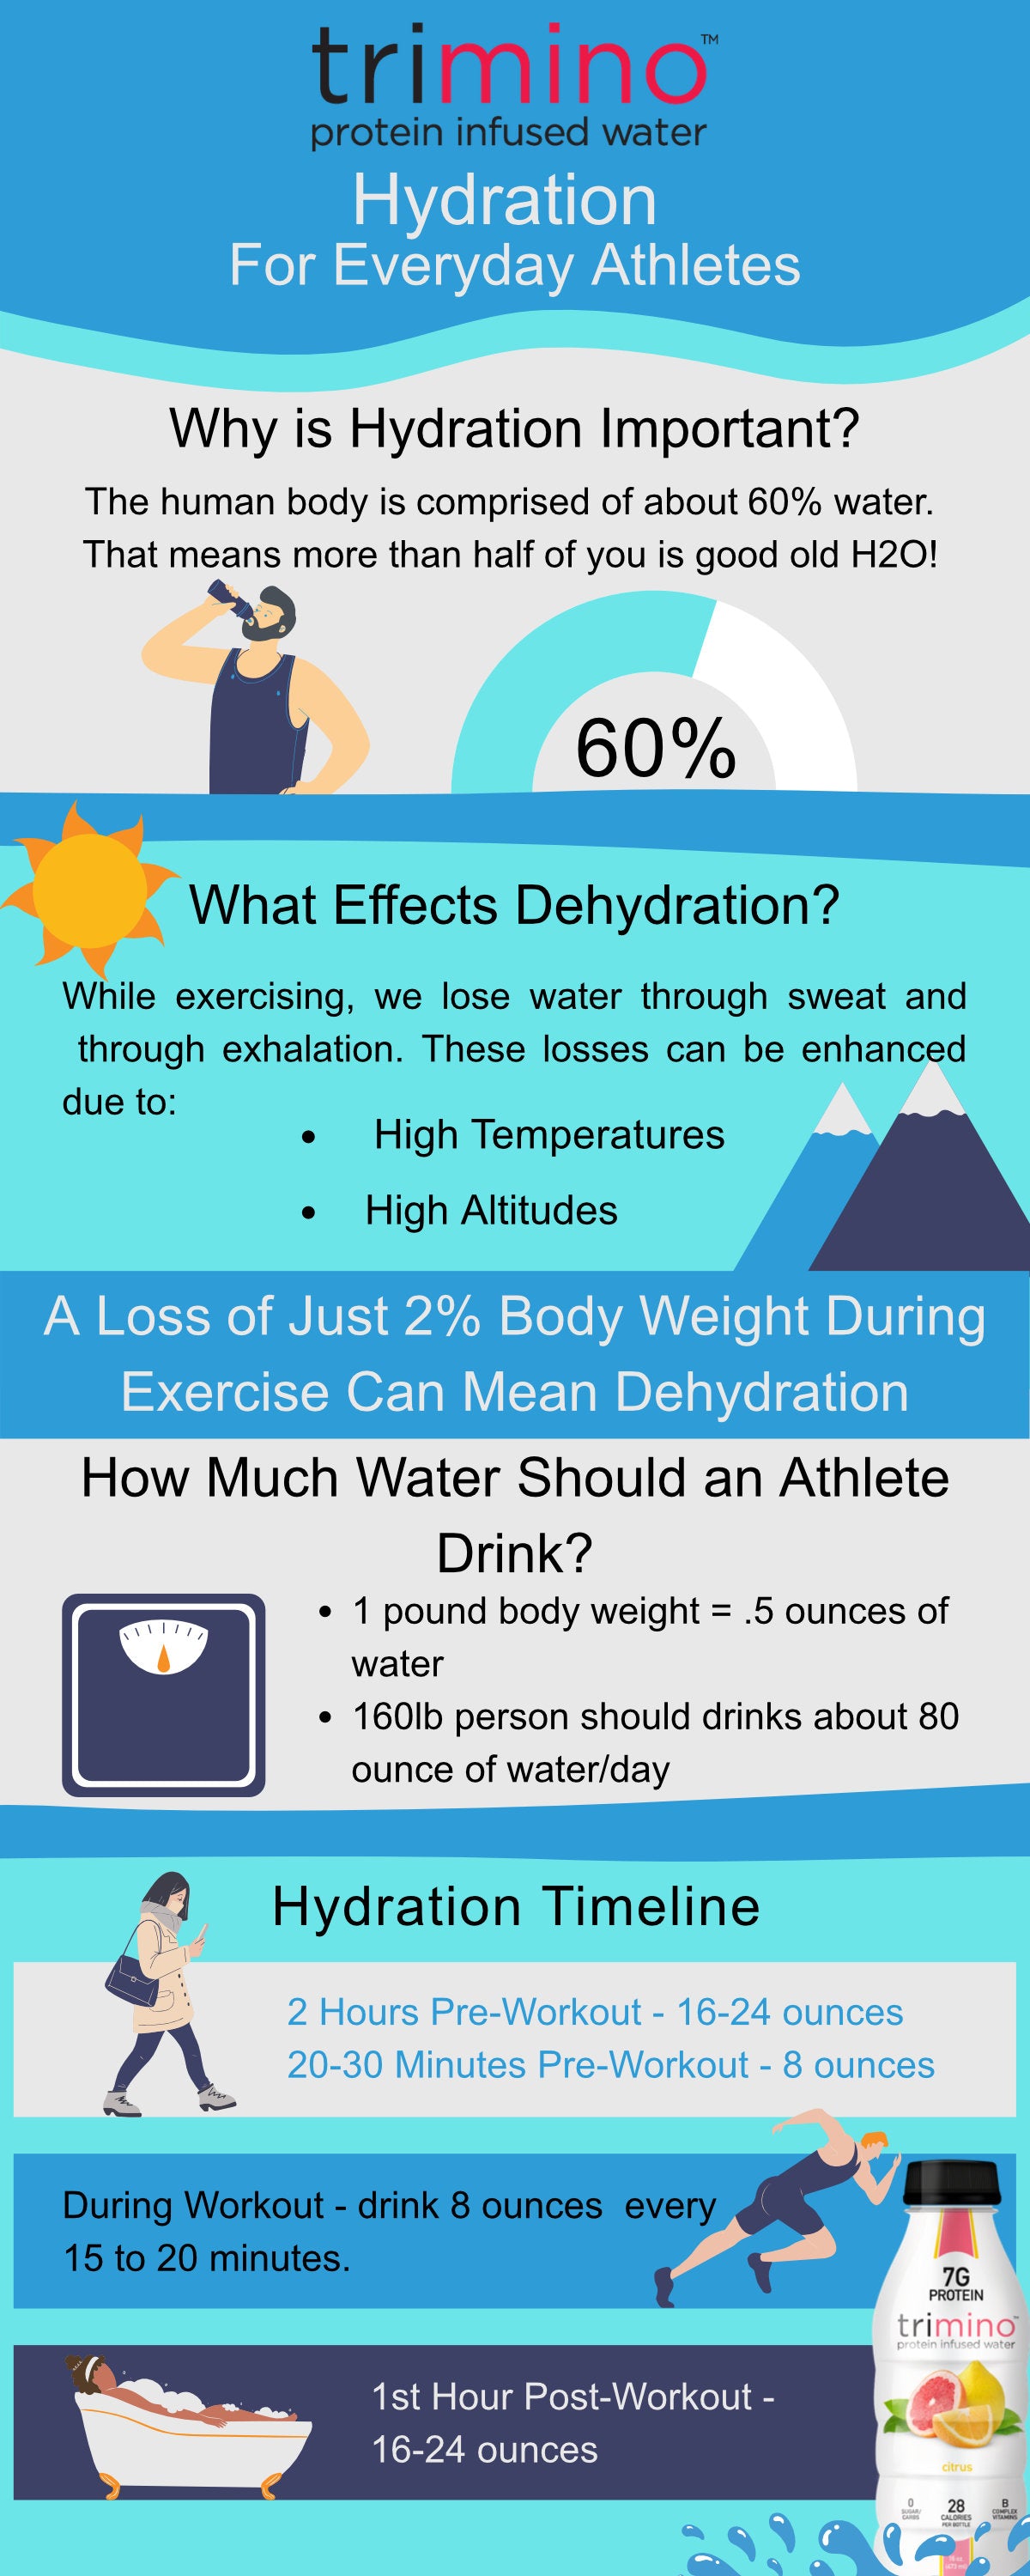 Hydration tips for pre-game preparation